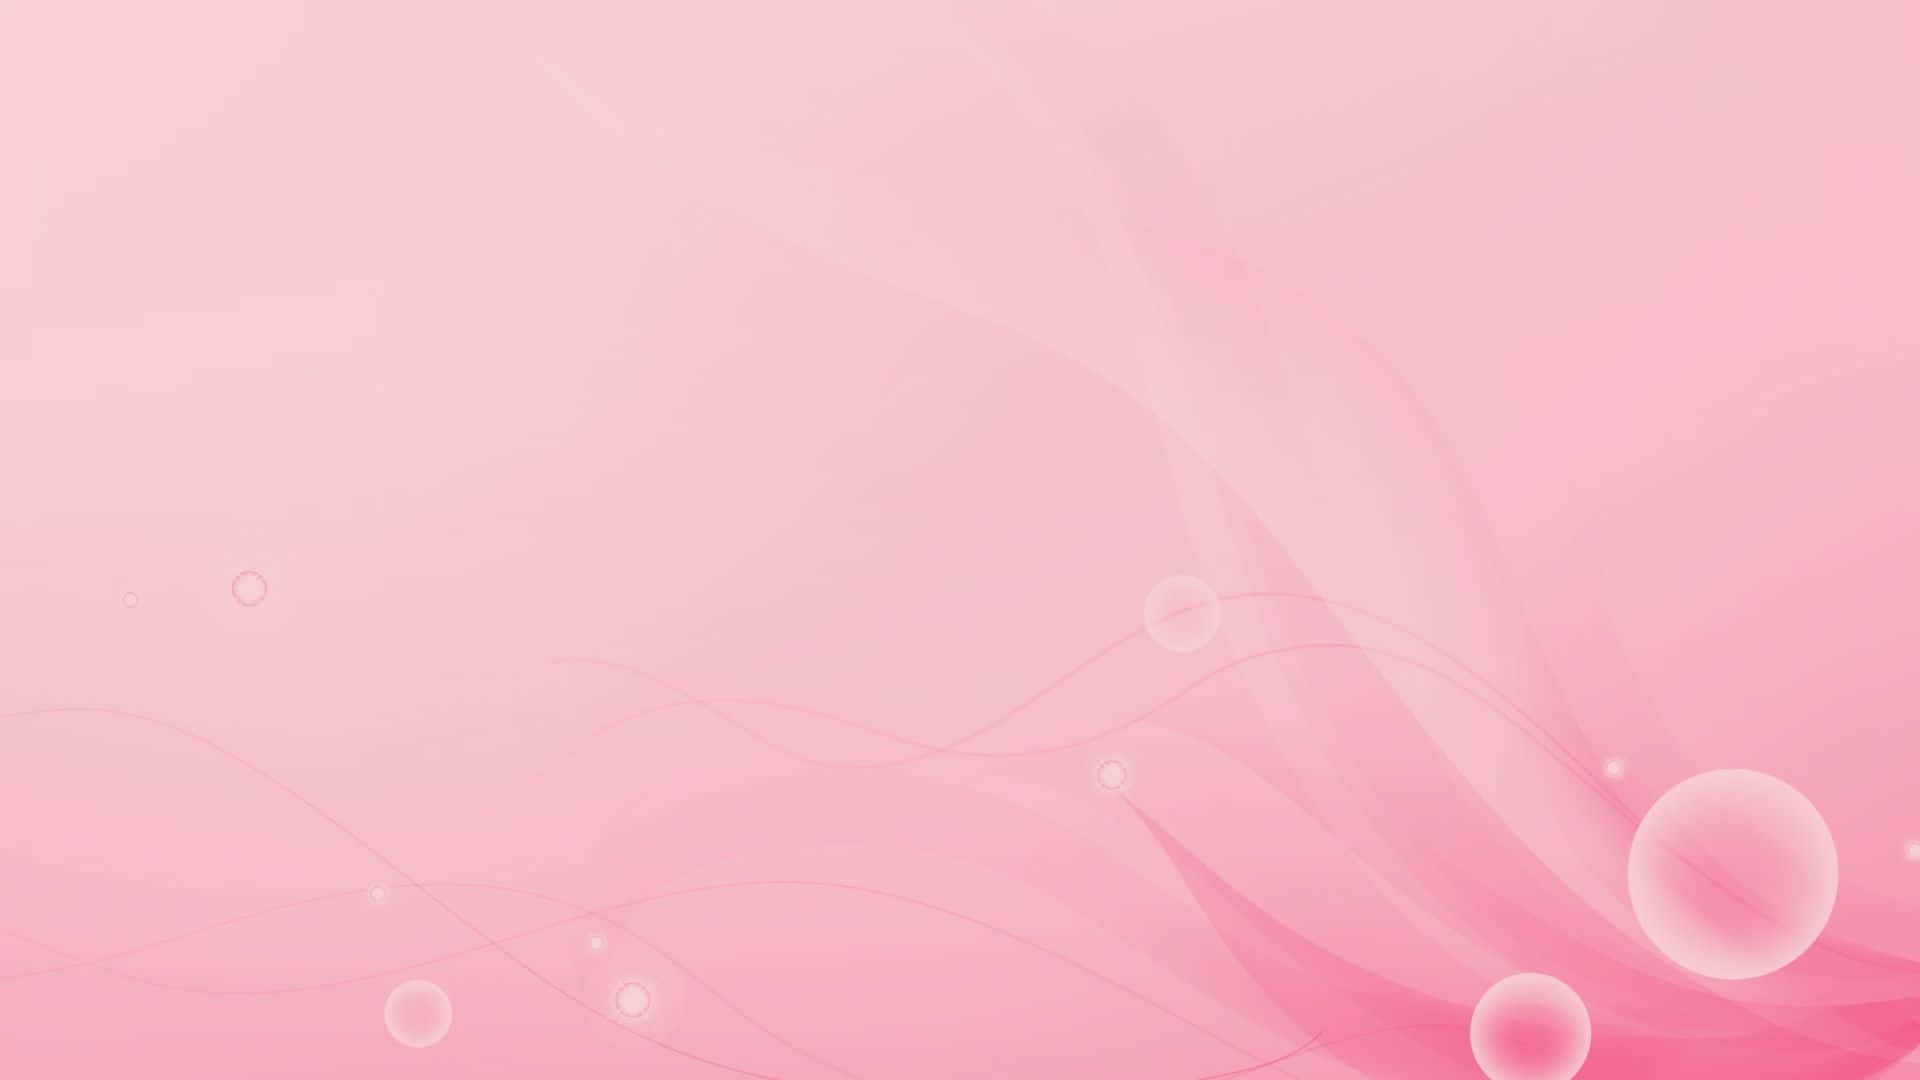 A beautiful pastel pink and white background